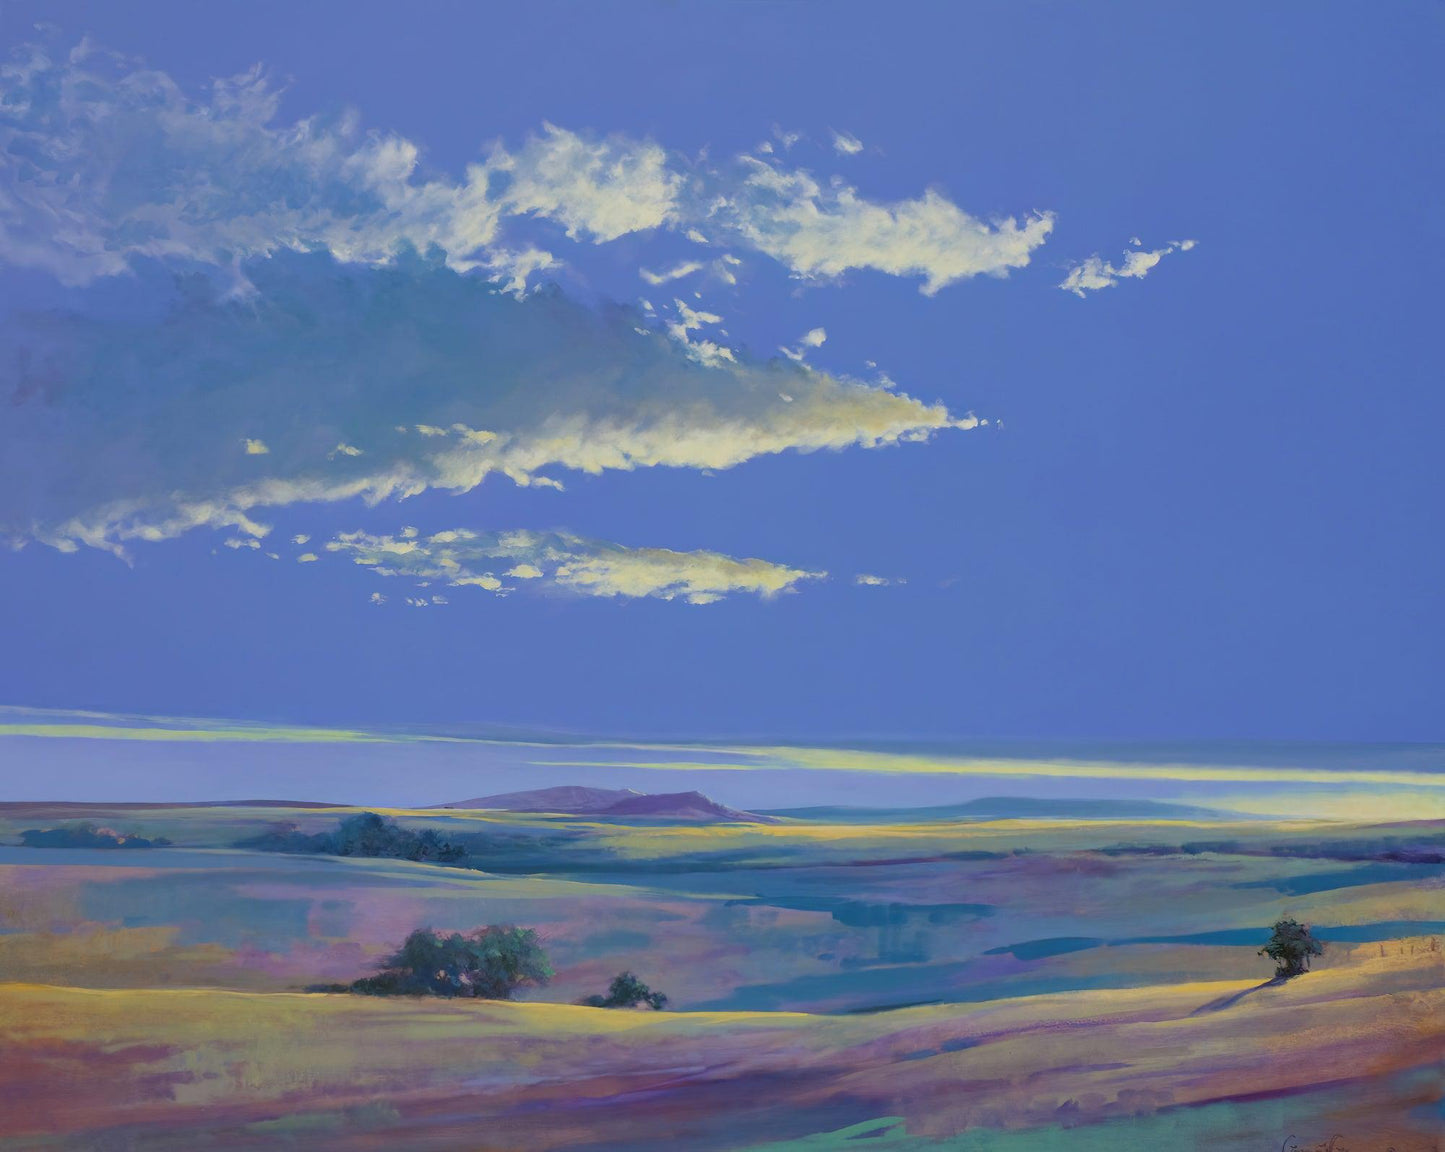 New Day Dawning-Painting-Lawrence Lee-Sorrel Sky Gallery